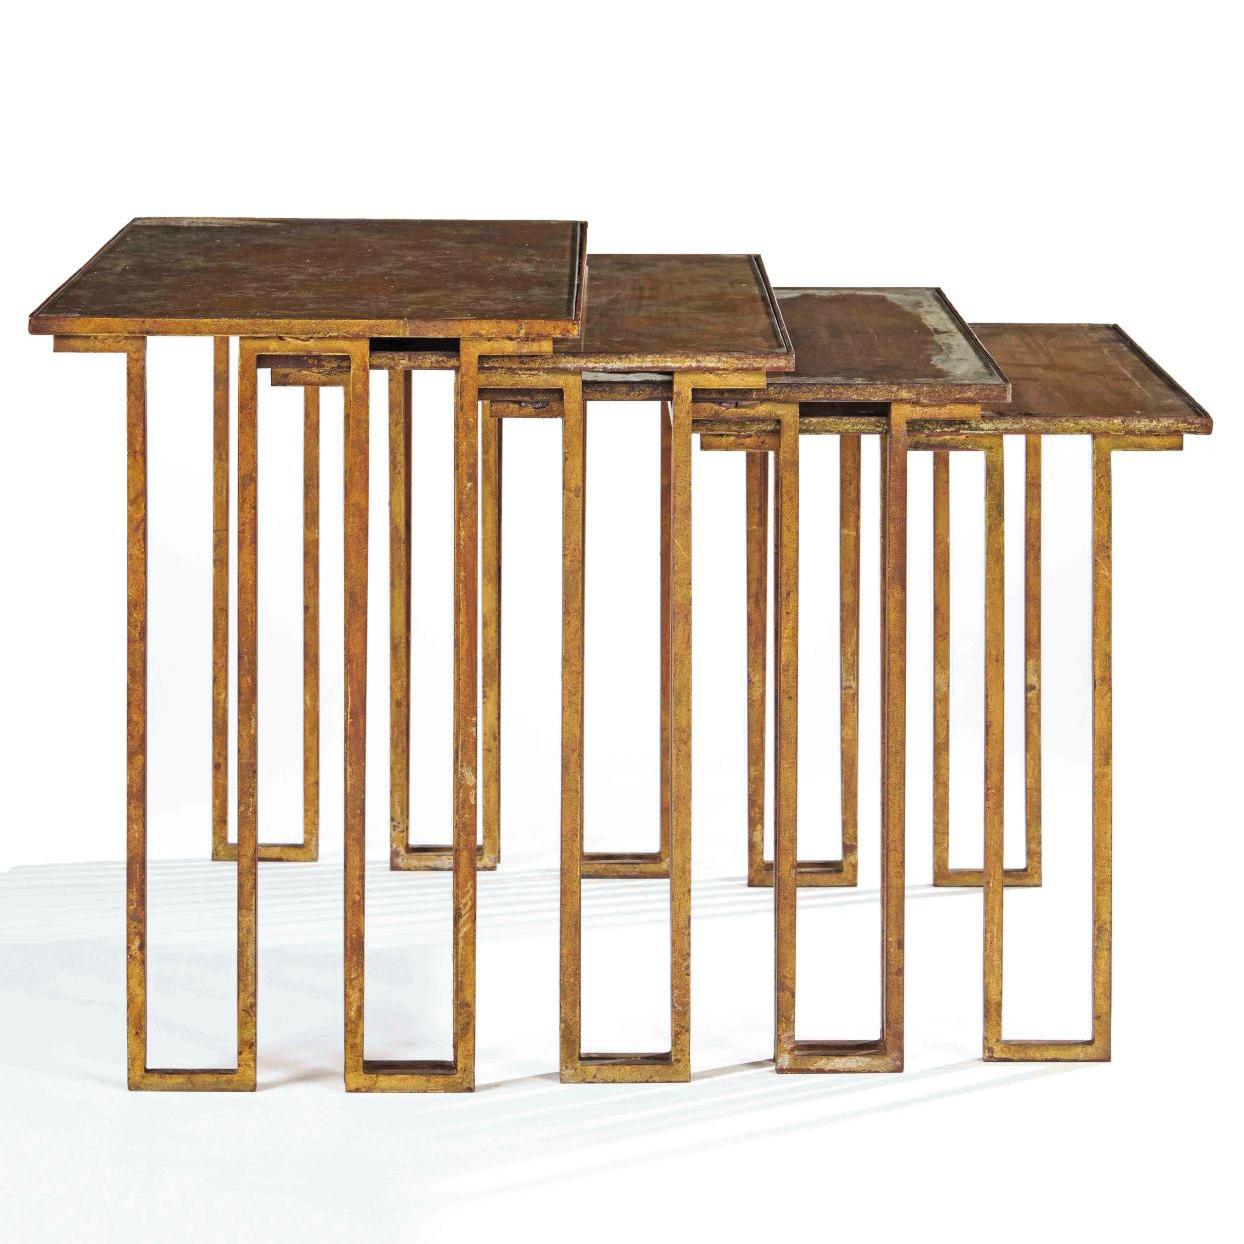 Jean Royère’s Nesting Tables  - Lots sold